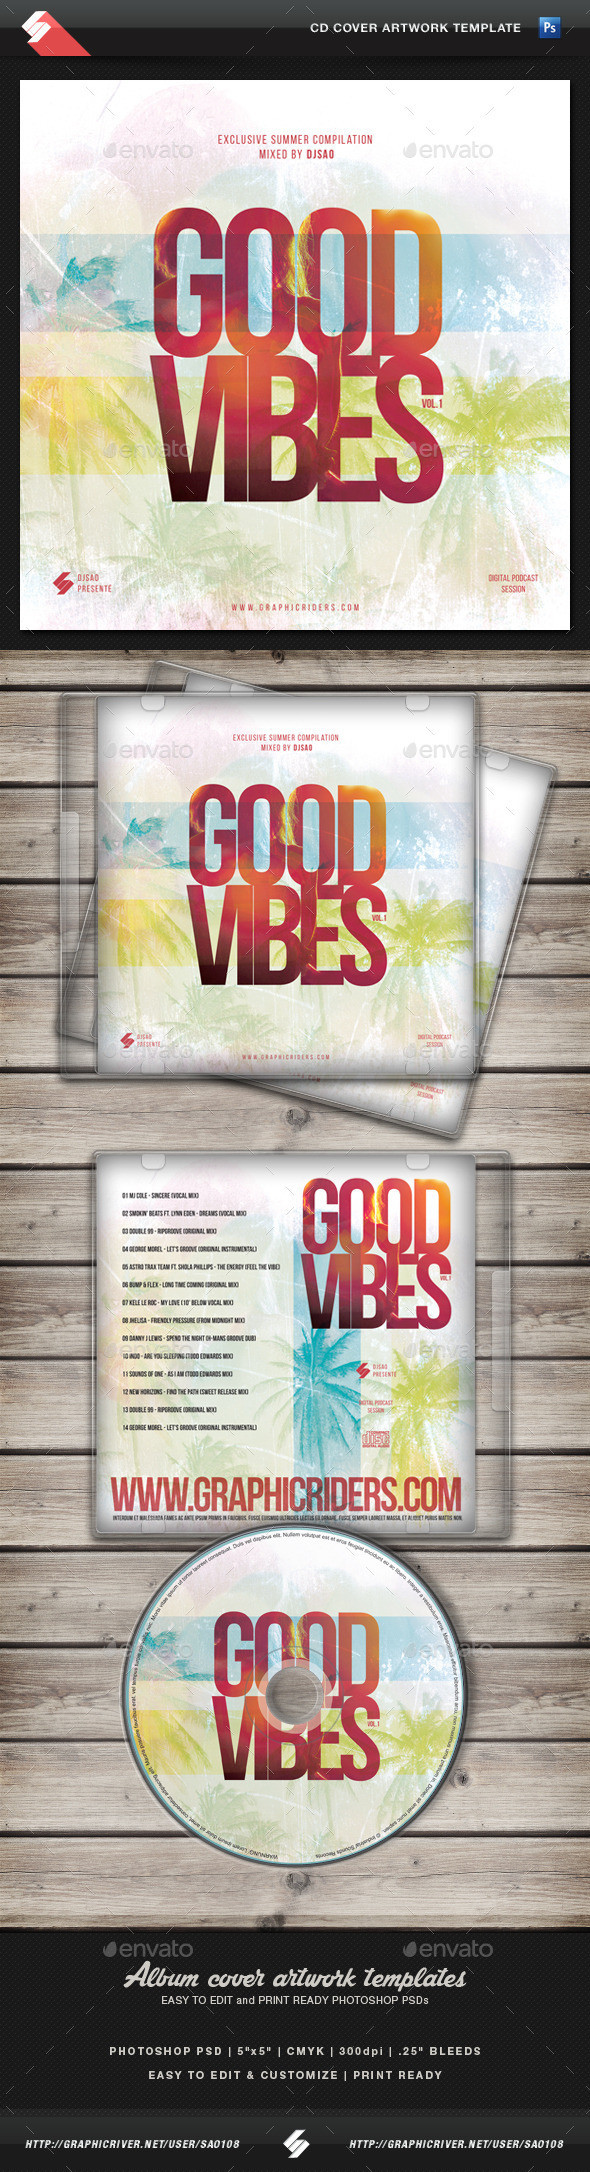 Goodvibes vol1 cd cover template preview